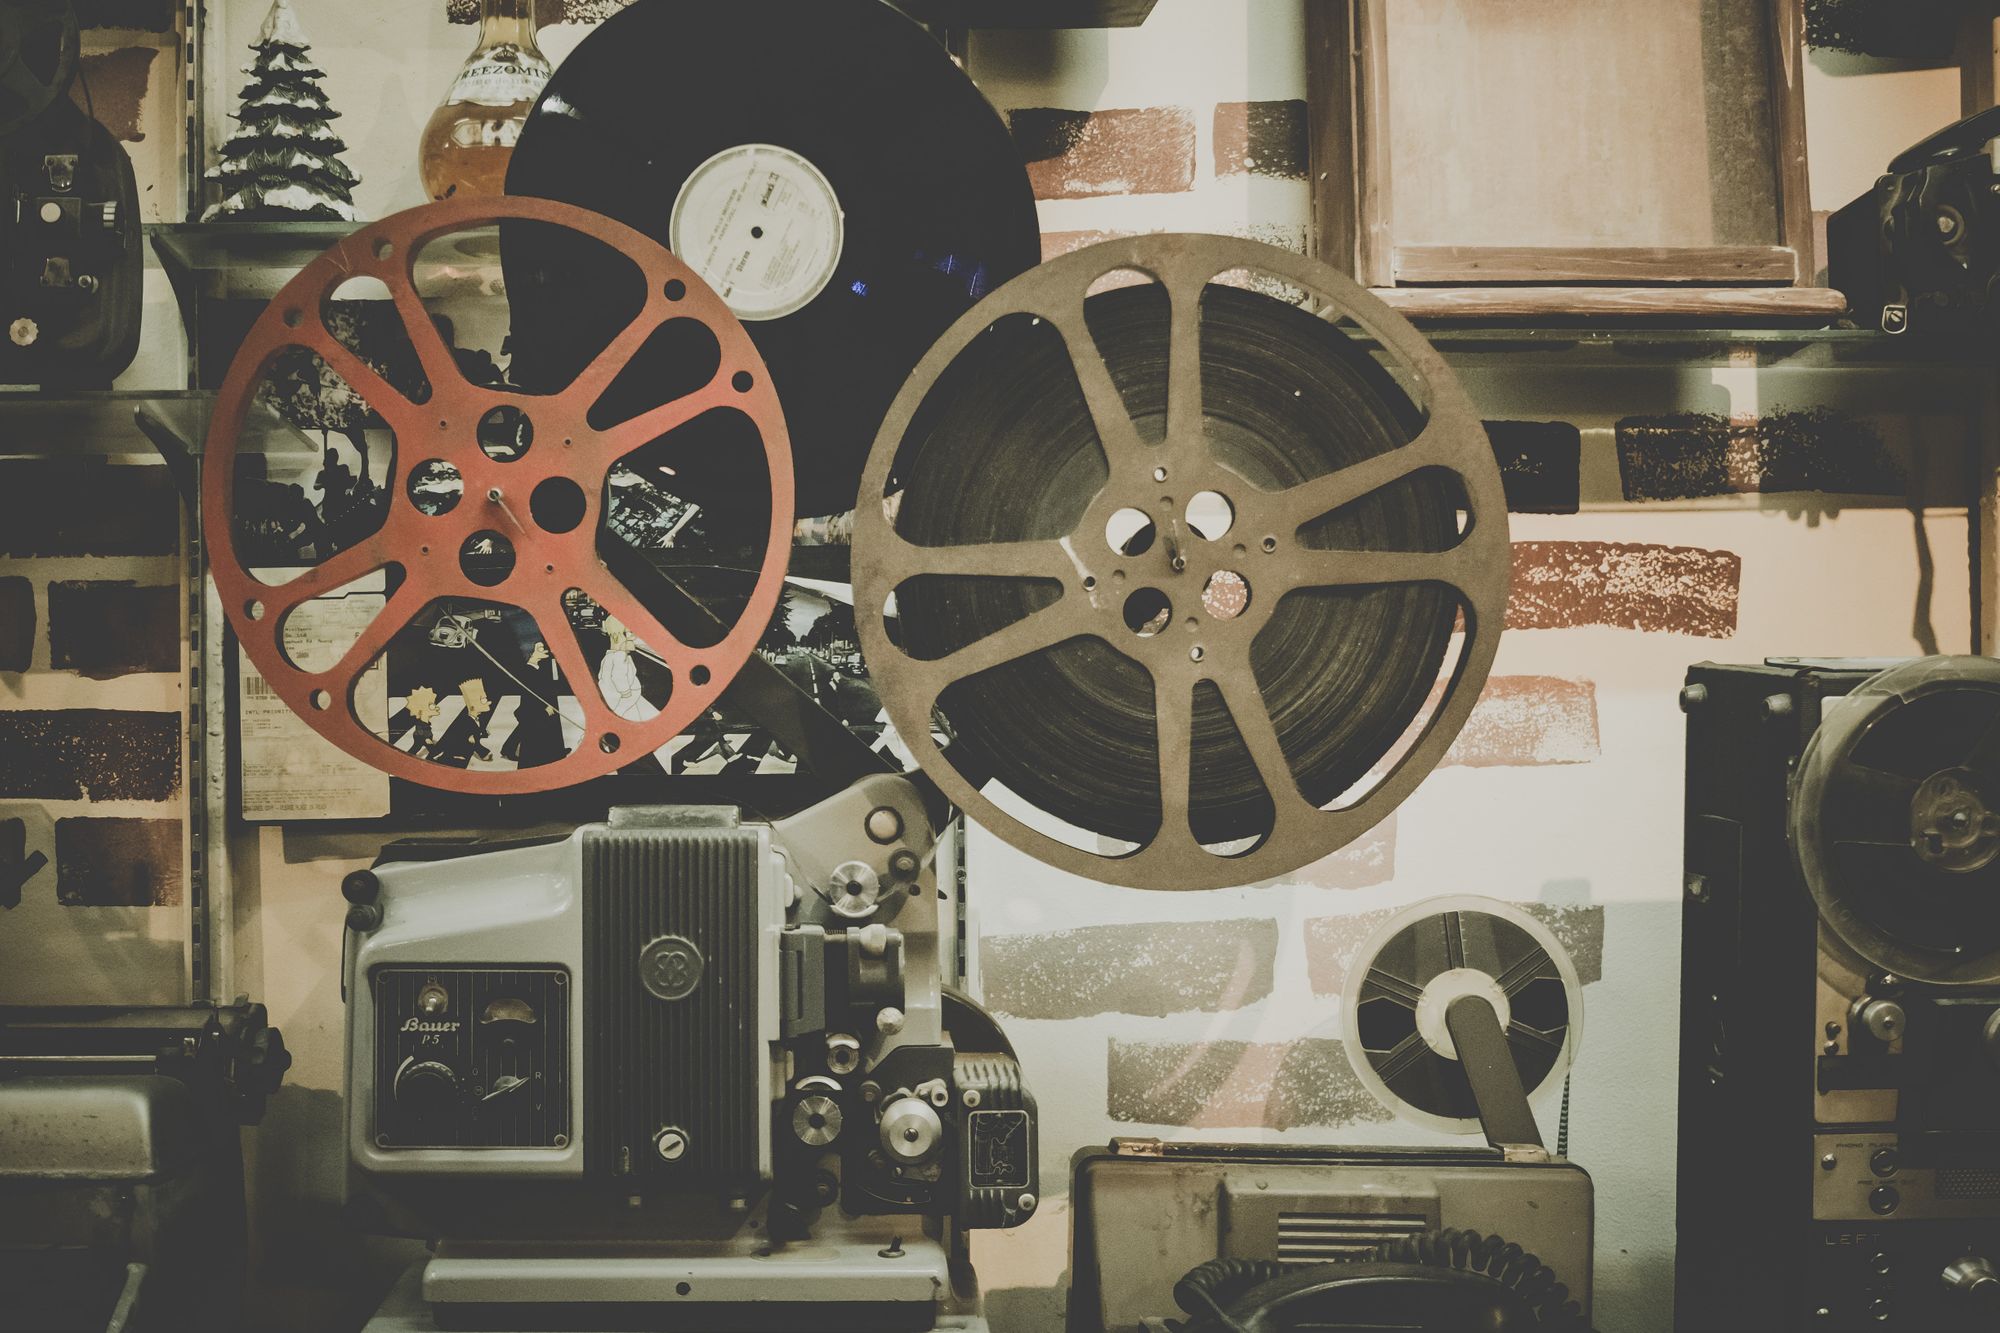 An antique film projector